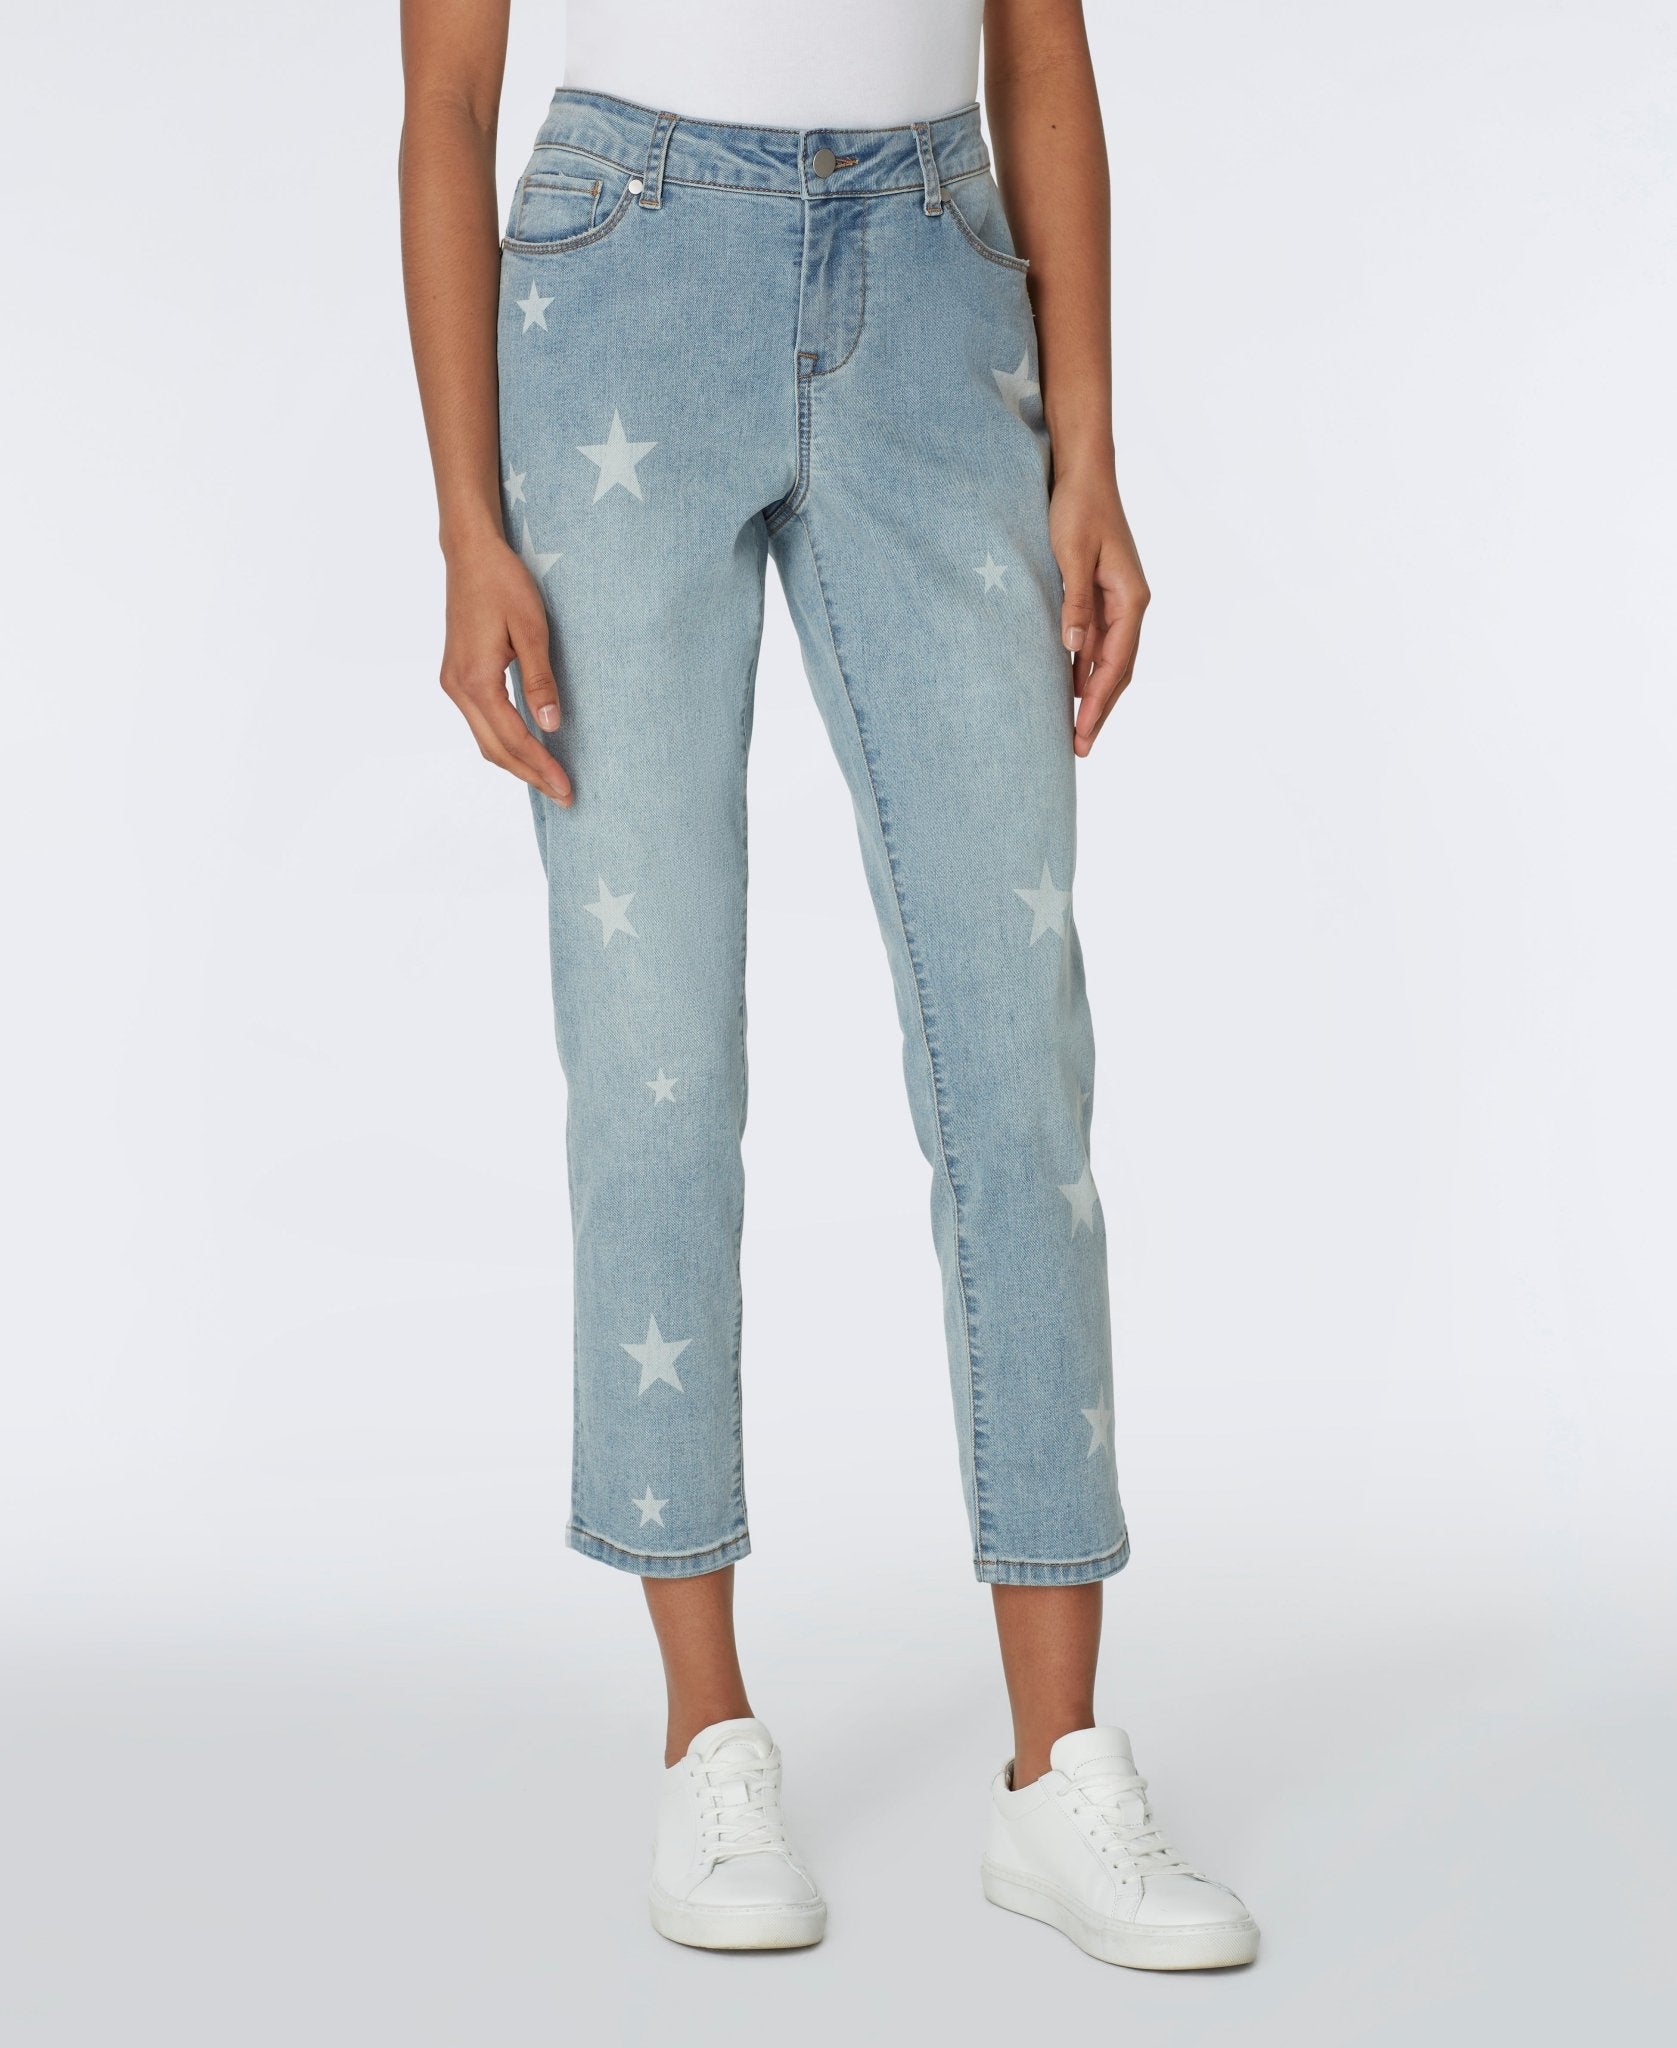 Westport Signature Skinny Jeans with Star Print - DressbarnClothing